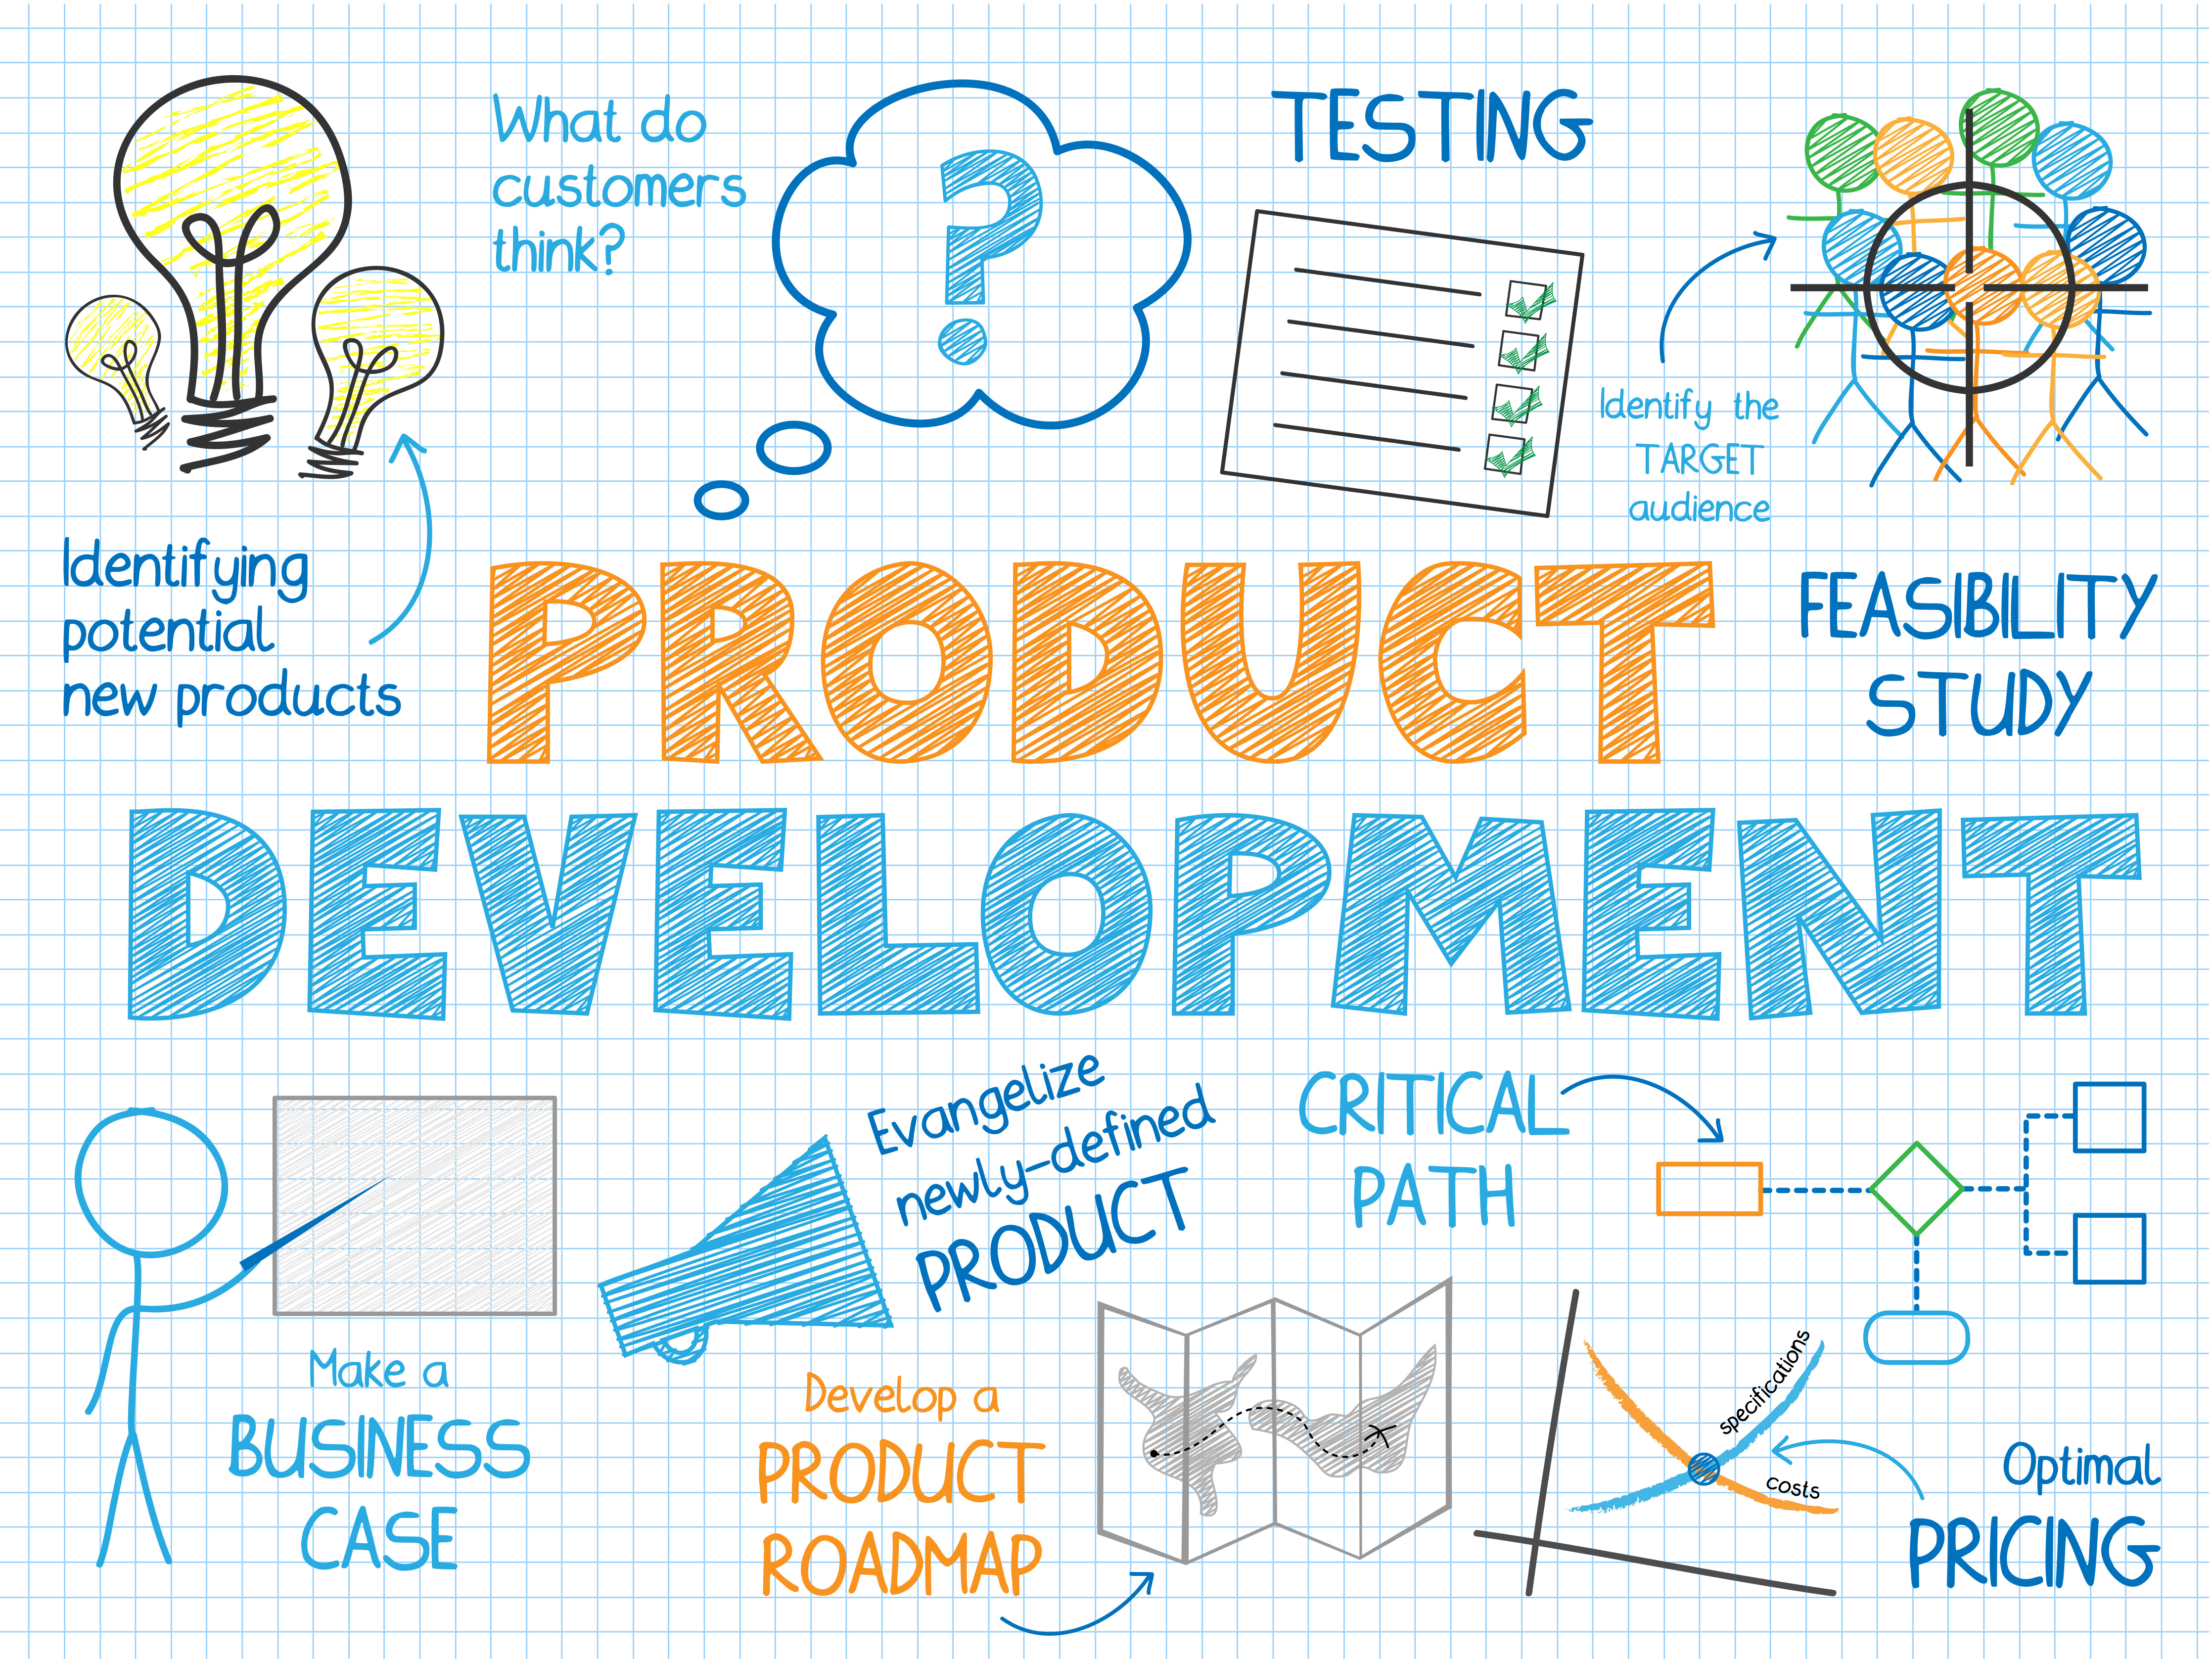 8 Questions A Product Manager Should Ask About A New Product